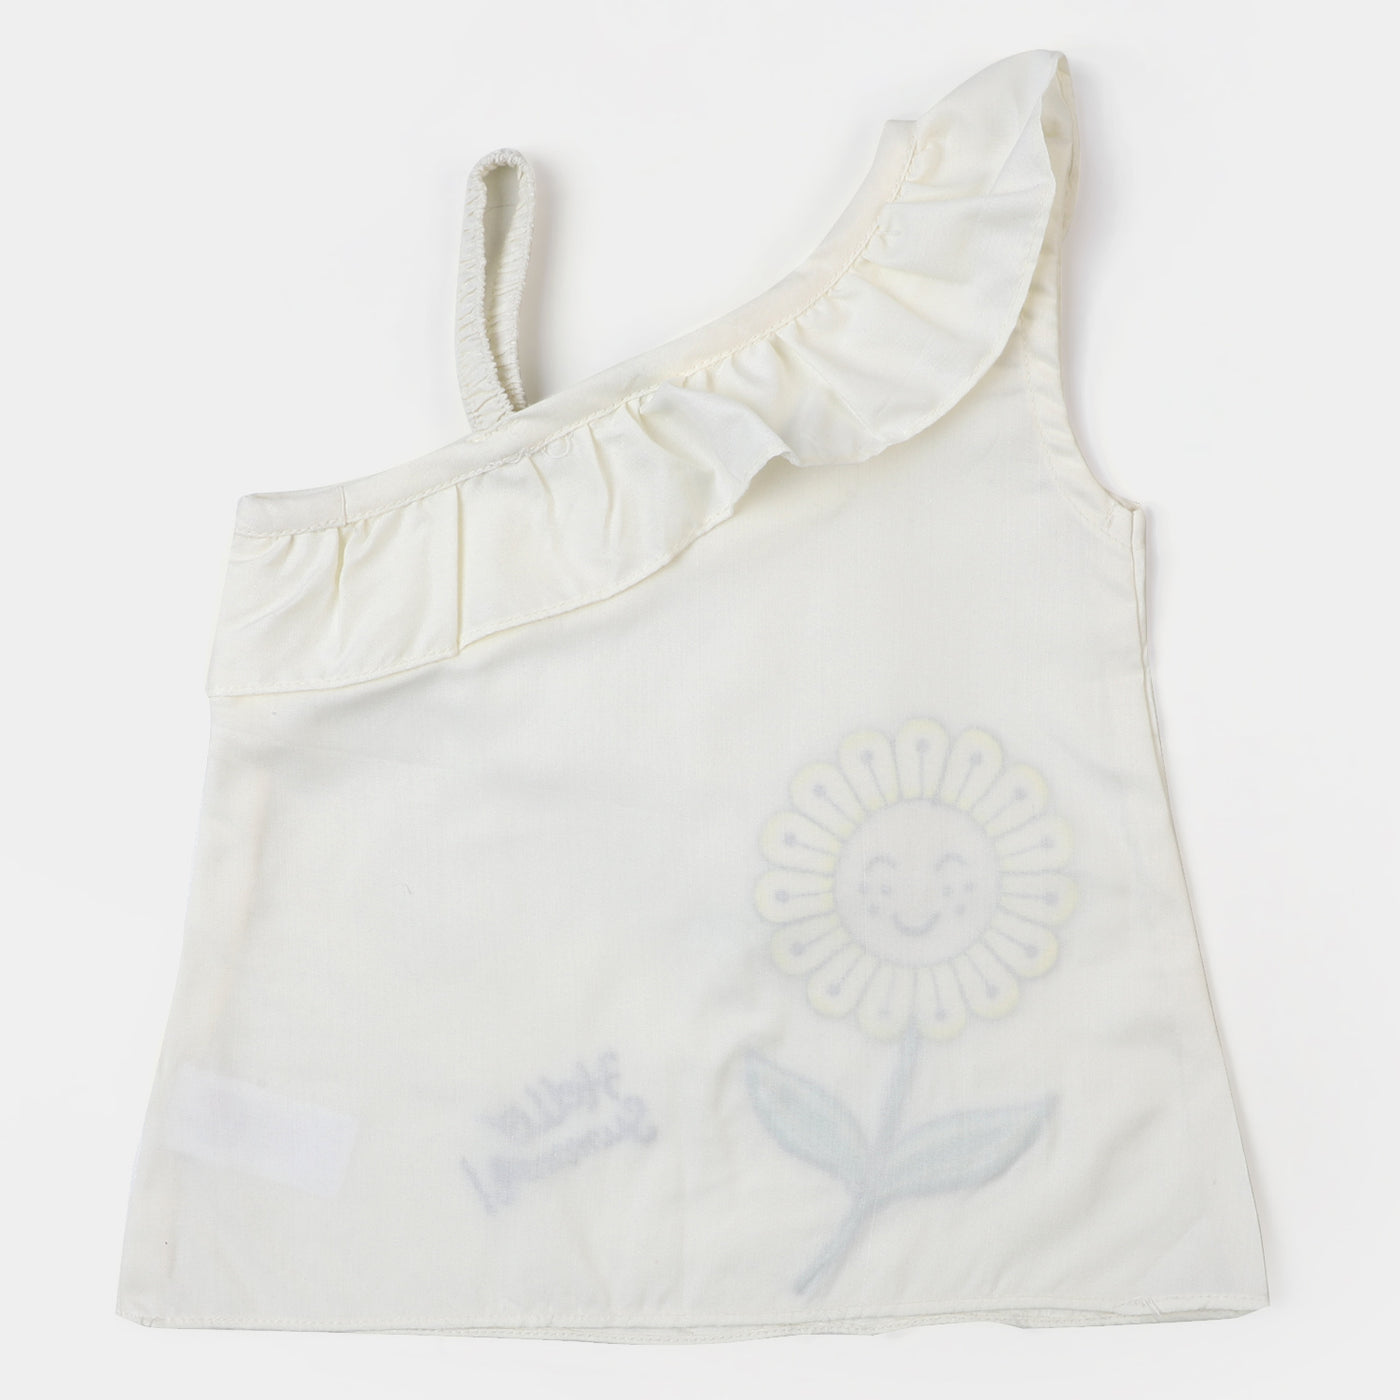 Infant Girls Cotton Embroidered Top Hello Summer - Off White